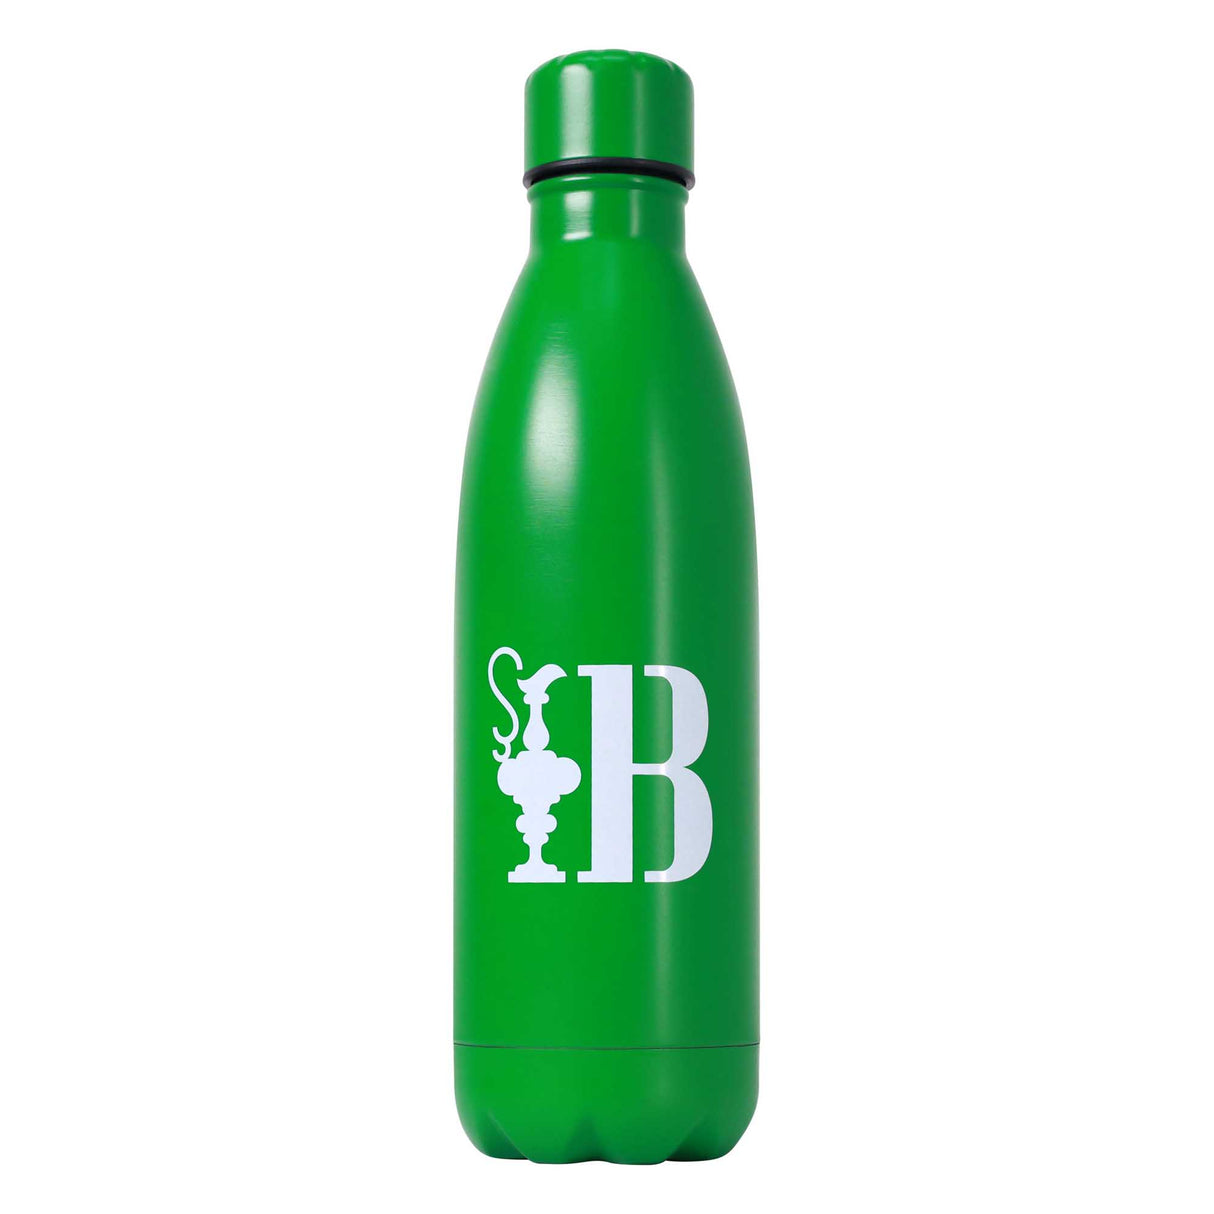 37th America’s Cup Stainless Steel Bottle Green